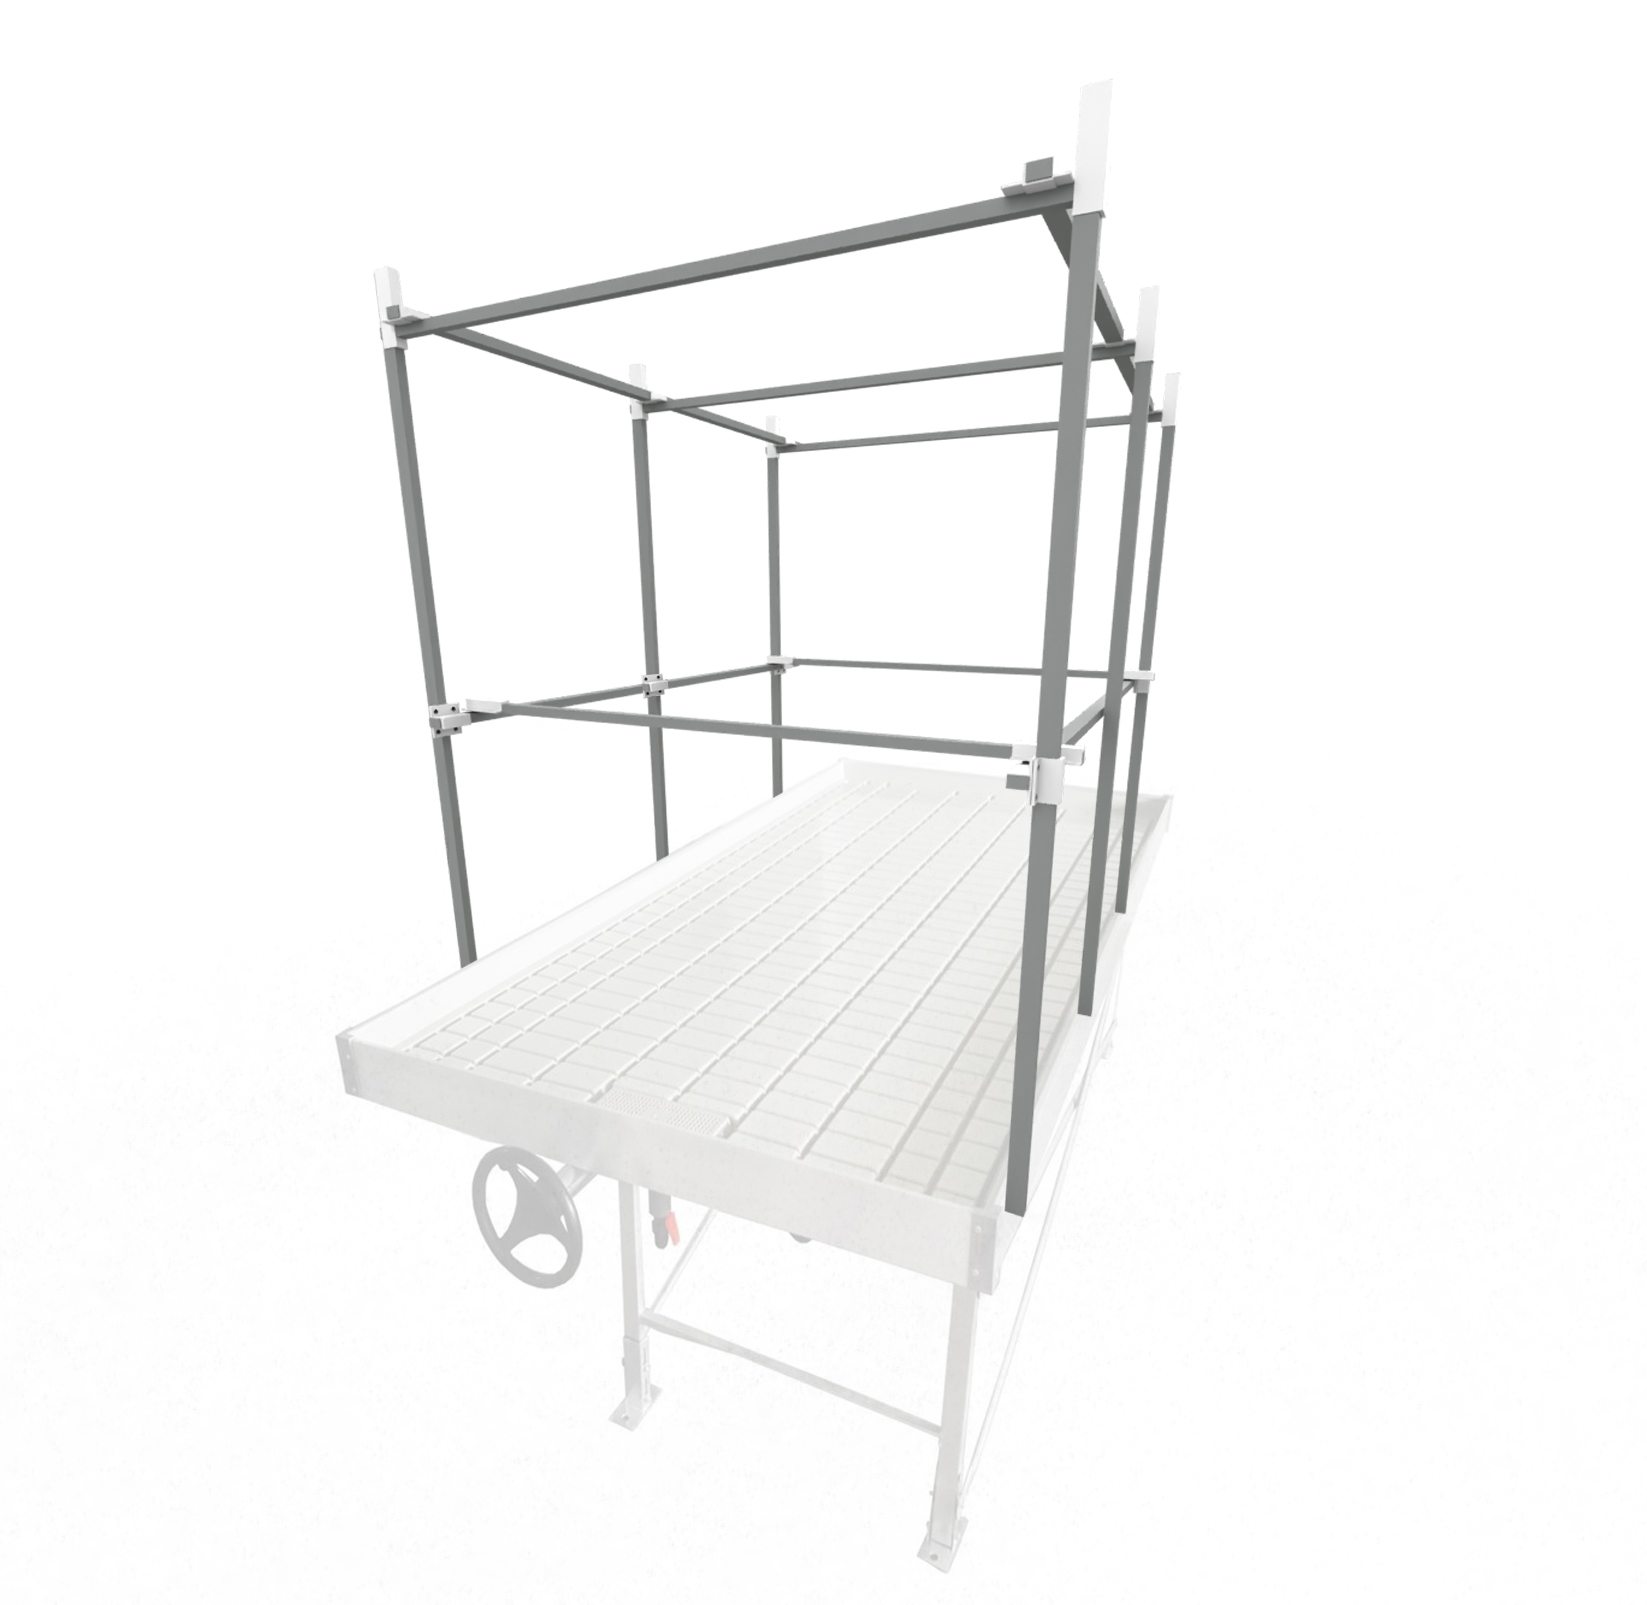 Lamp holder and Scrog for Rolling Bench - 1.53x3.05m - Platinium Hydroponics